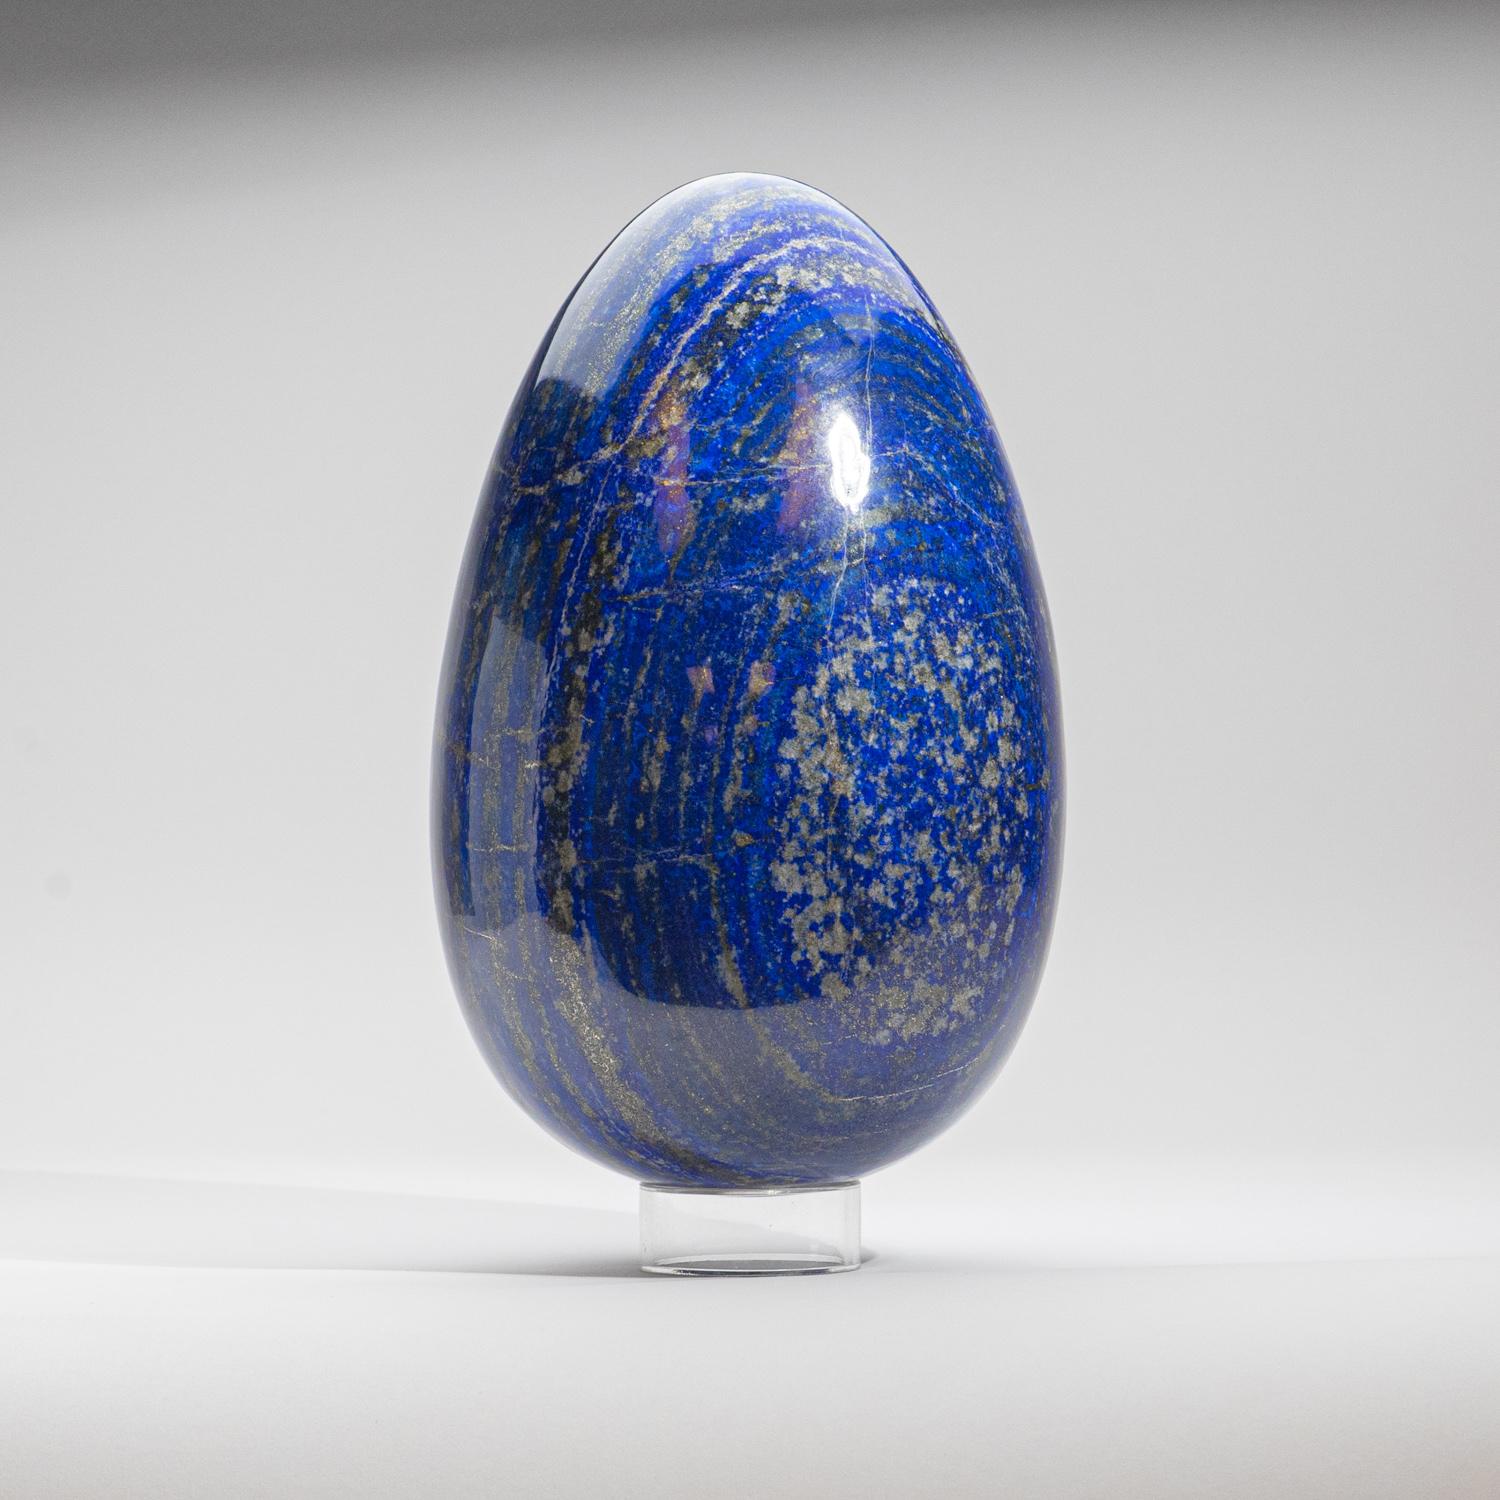 Polished Lapis Lazuli Egg from Afghanistan